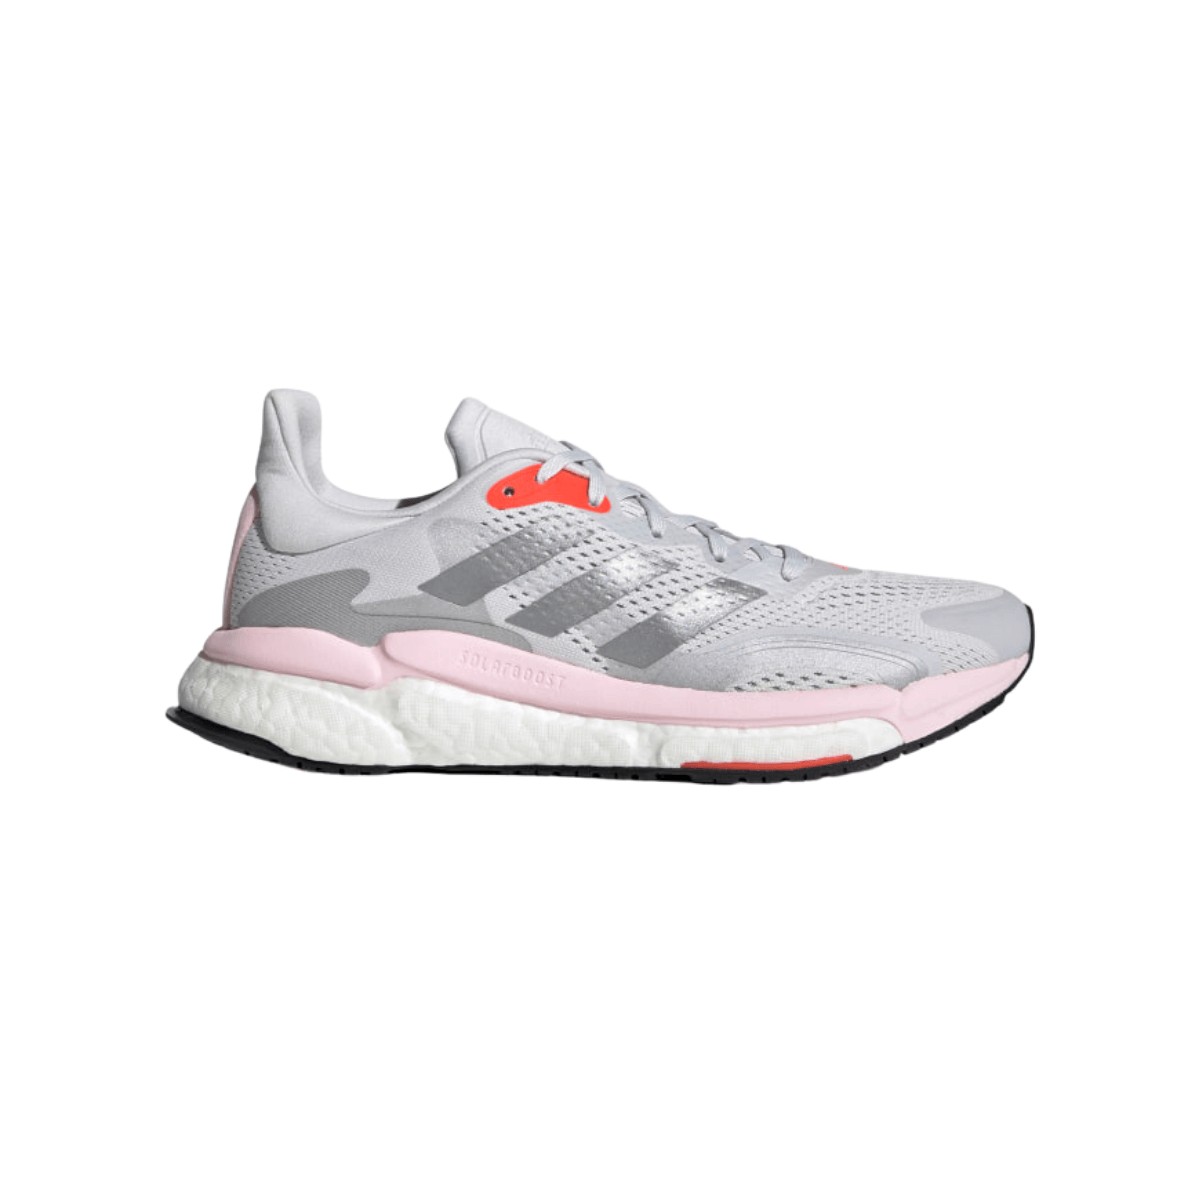 Chaussures Running Adidas Solar Boost 3 Gris Rose Rouge SS21 Femme, Taille UK 8